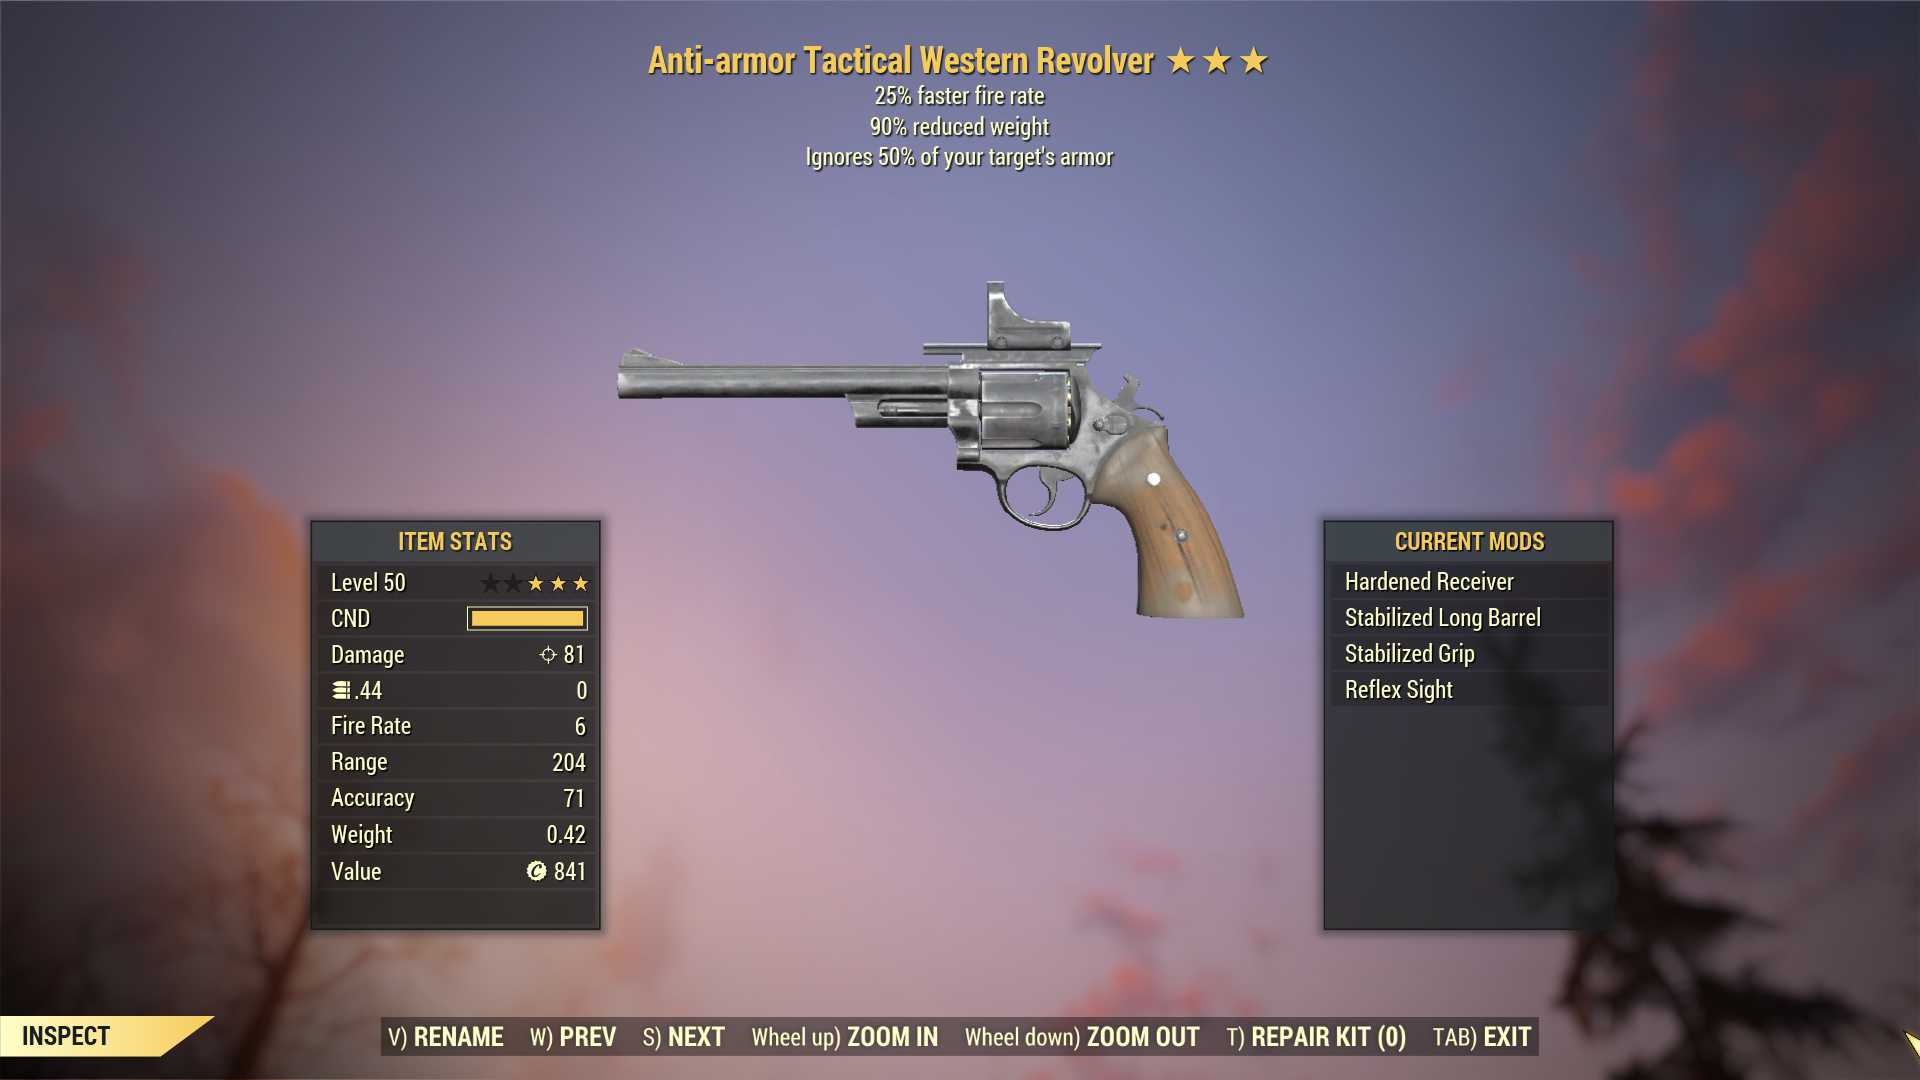 Anti-Armor Western Revolver (25% faster fire rate, 90% reduced weight)